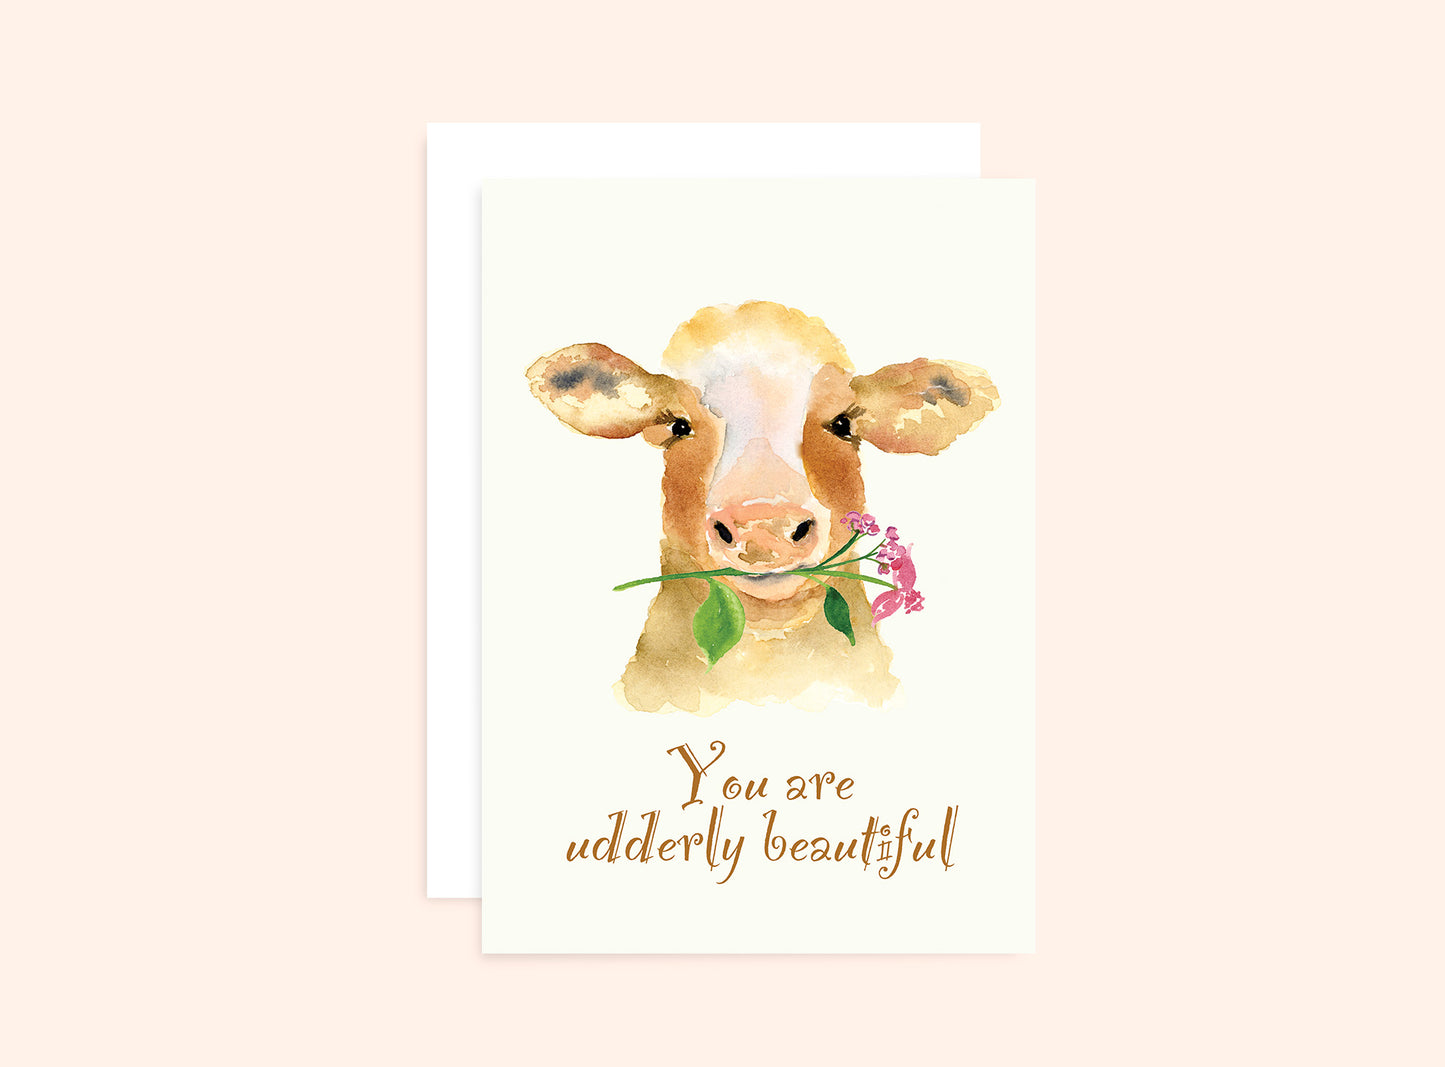 "You are udderly beautiful" Funny Cow Card